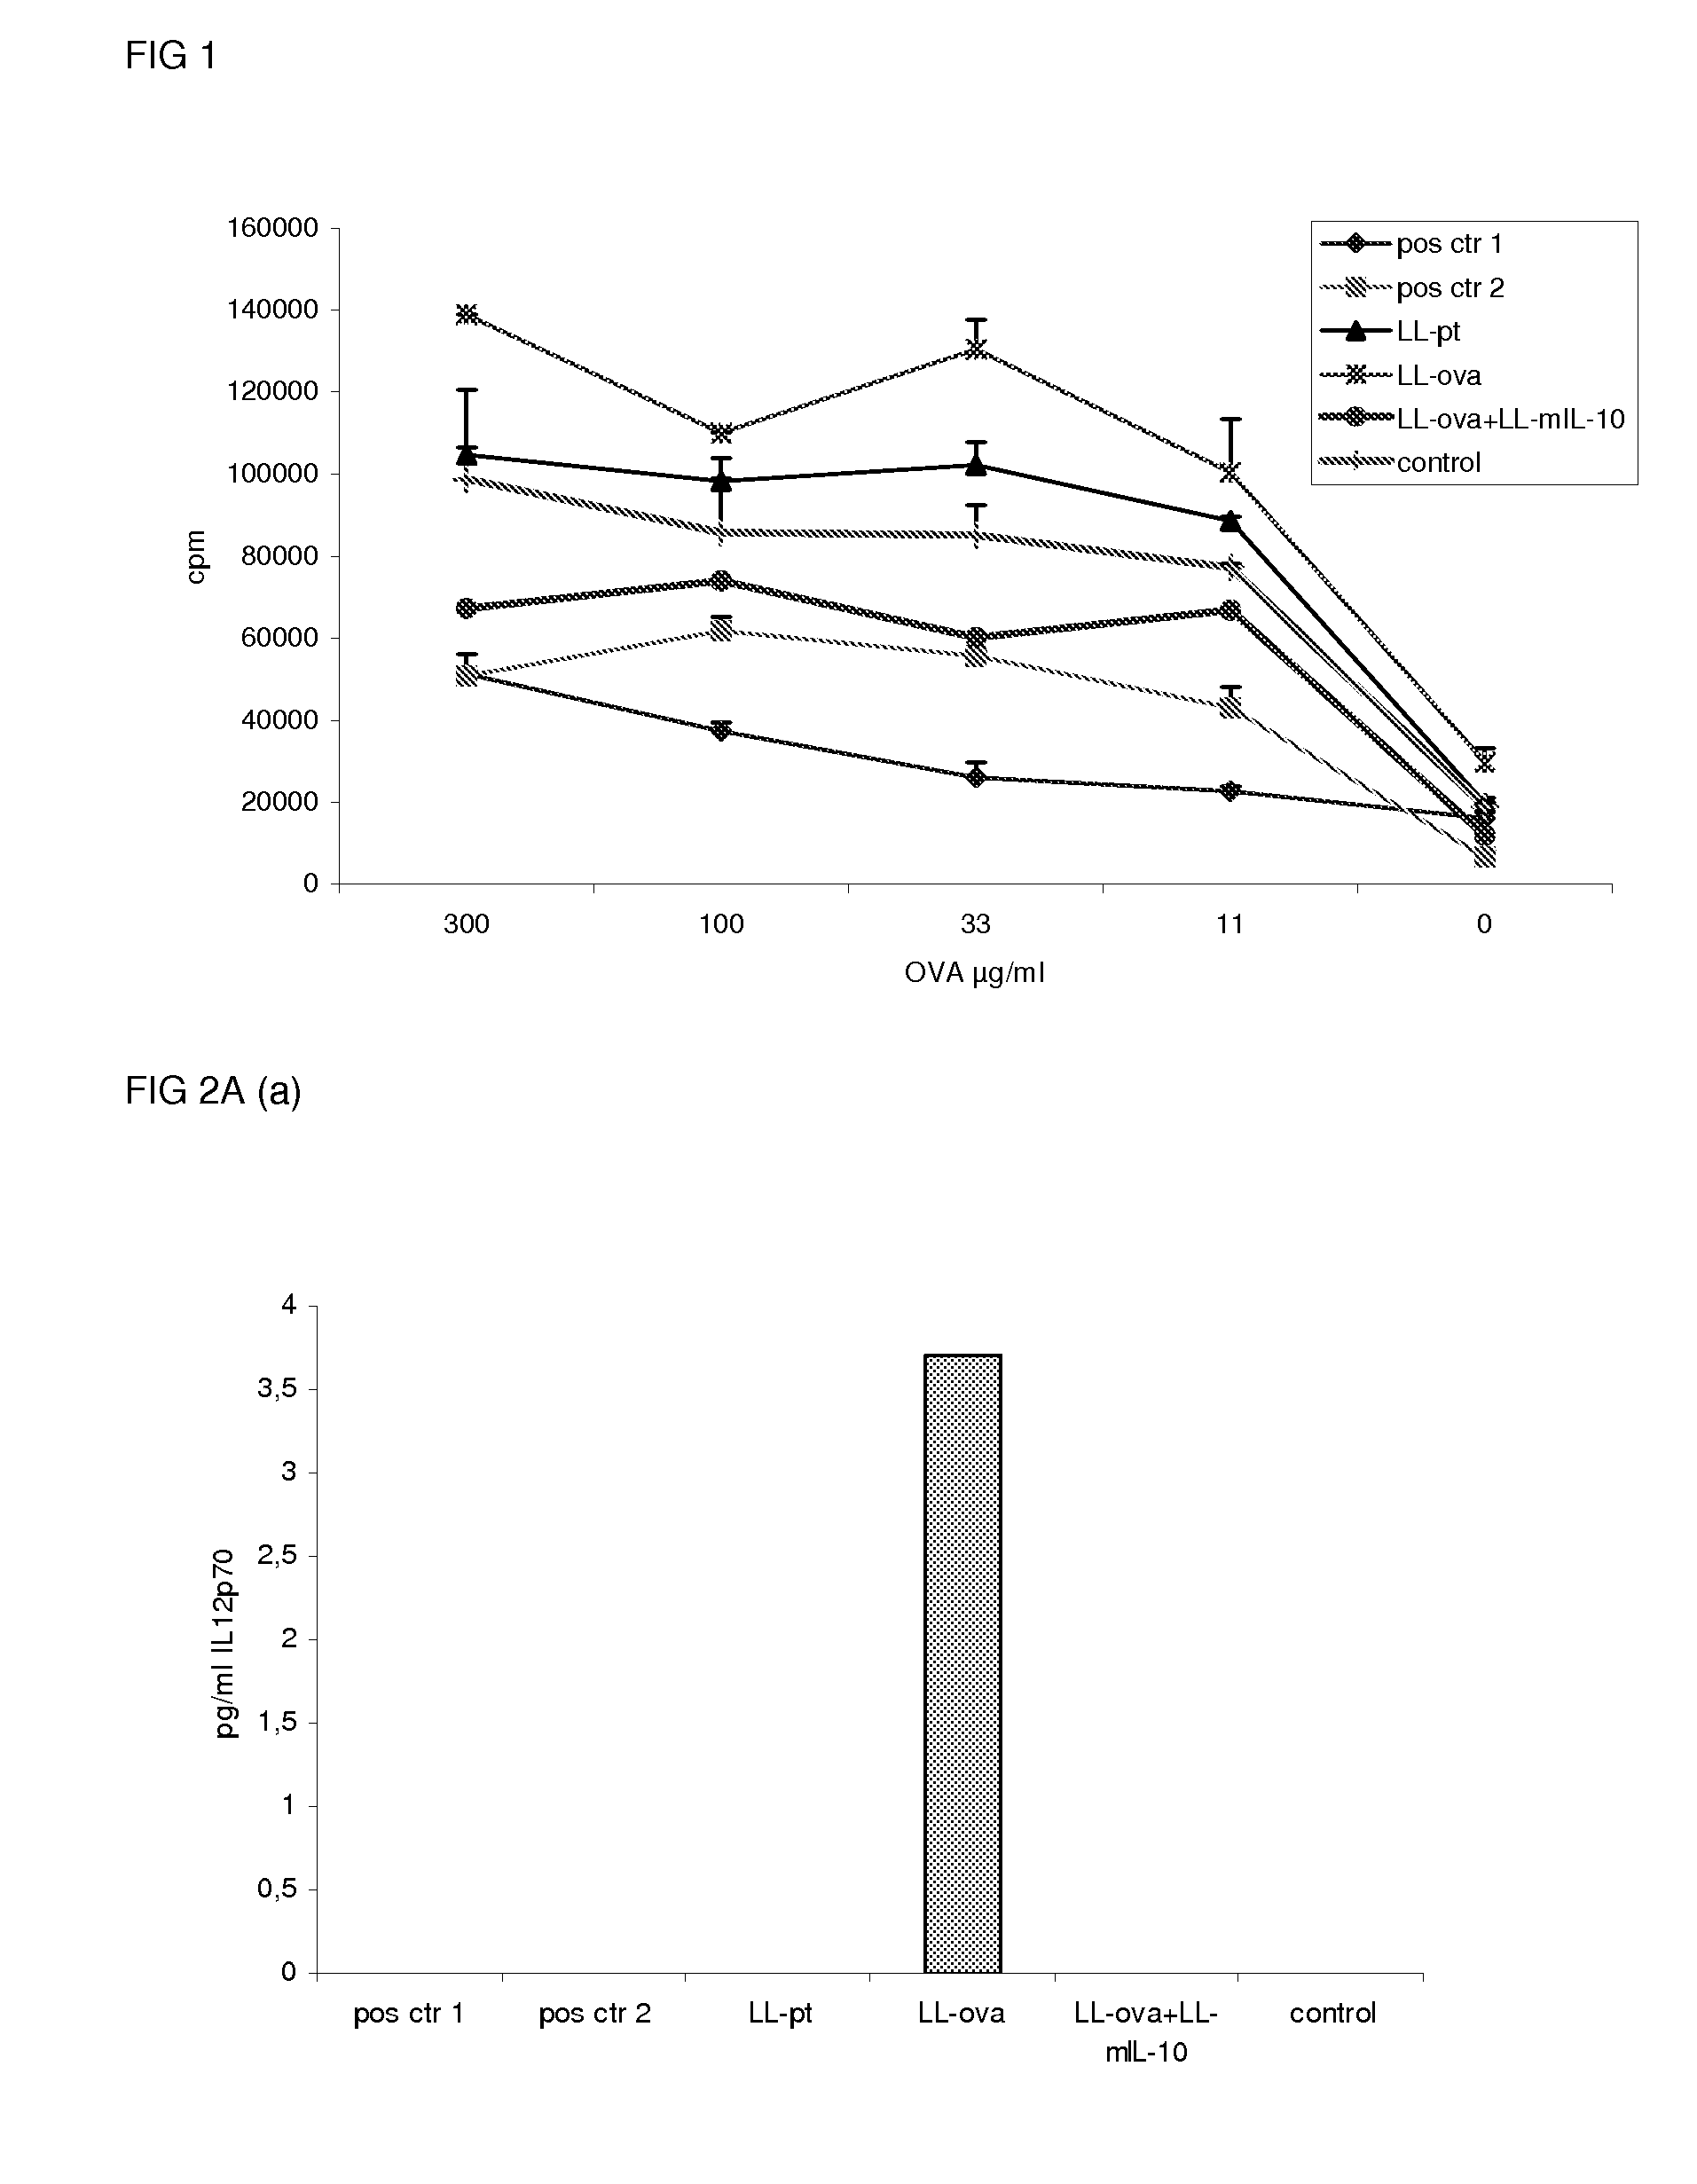 Induction of mucosal tolerance to antigens